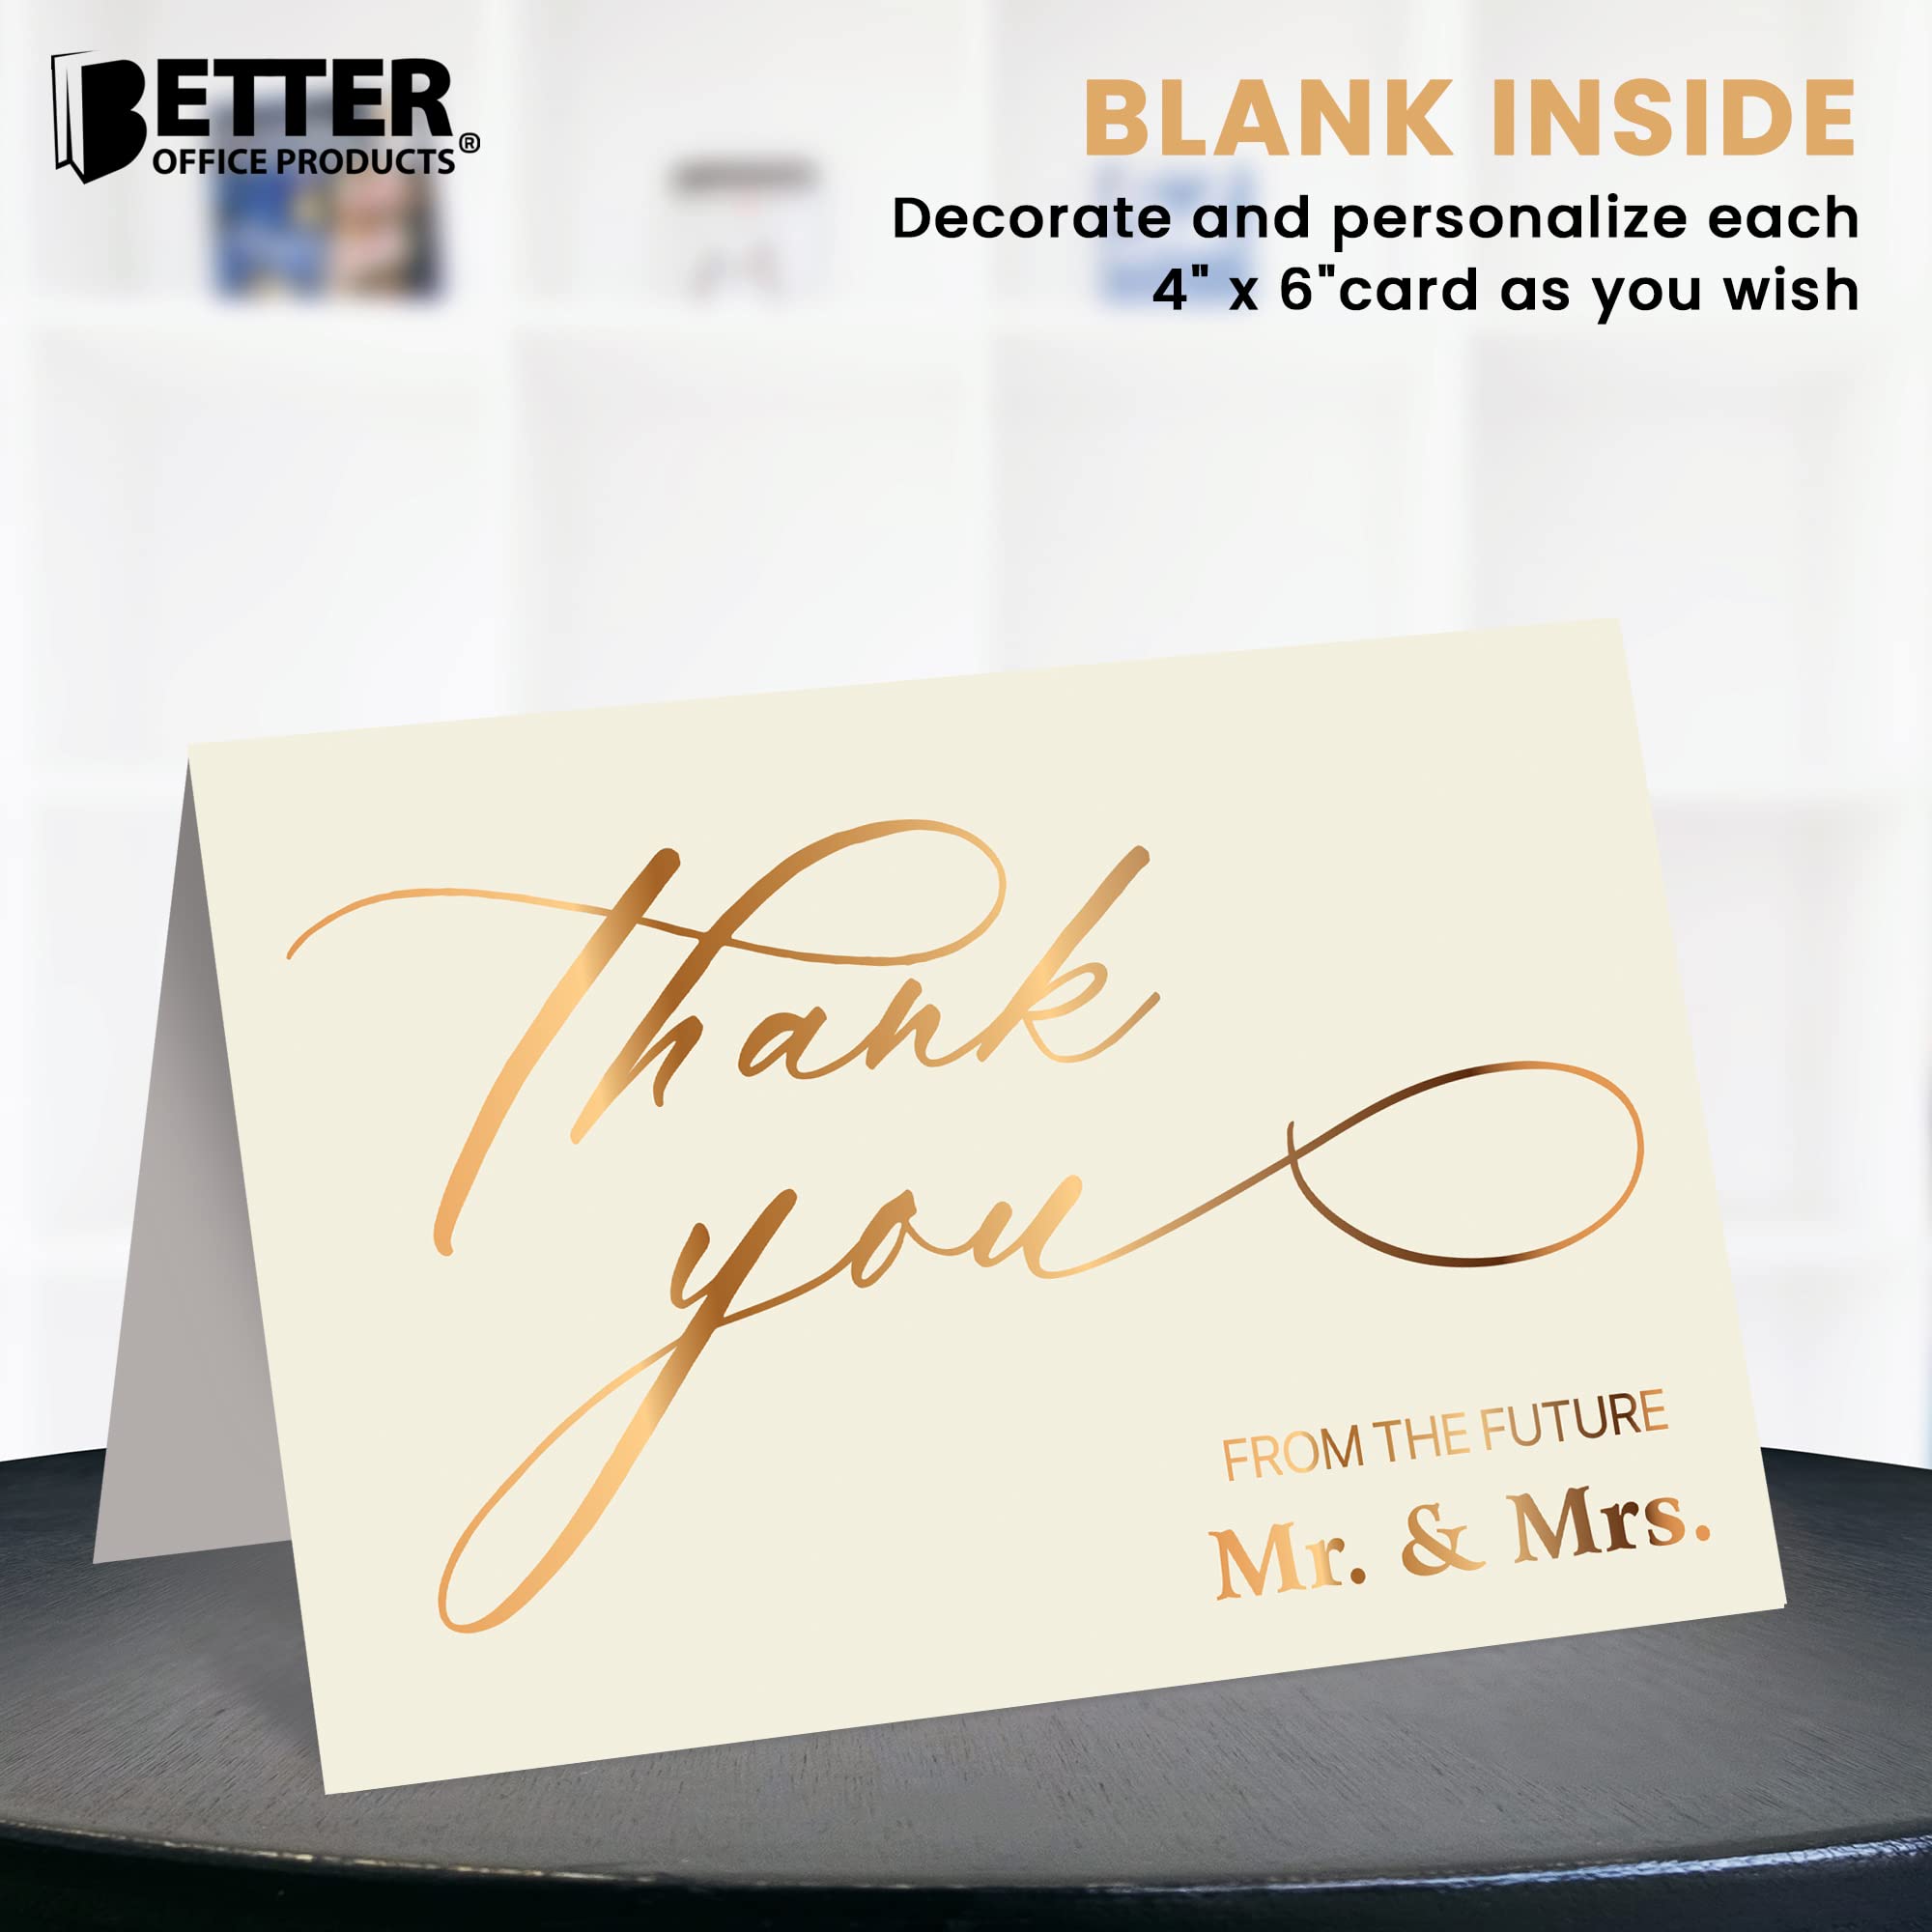 50 Pack Wedding Engagement Thank You Cards in Metallic Gold with Envelopes, 4 x 6 Inch, Wedding Shower Thank You From The Future Mr and Mrs, Blank Cards, by Better Office Products, 50 Count Boxed Set